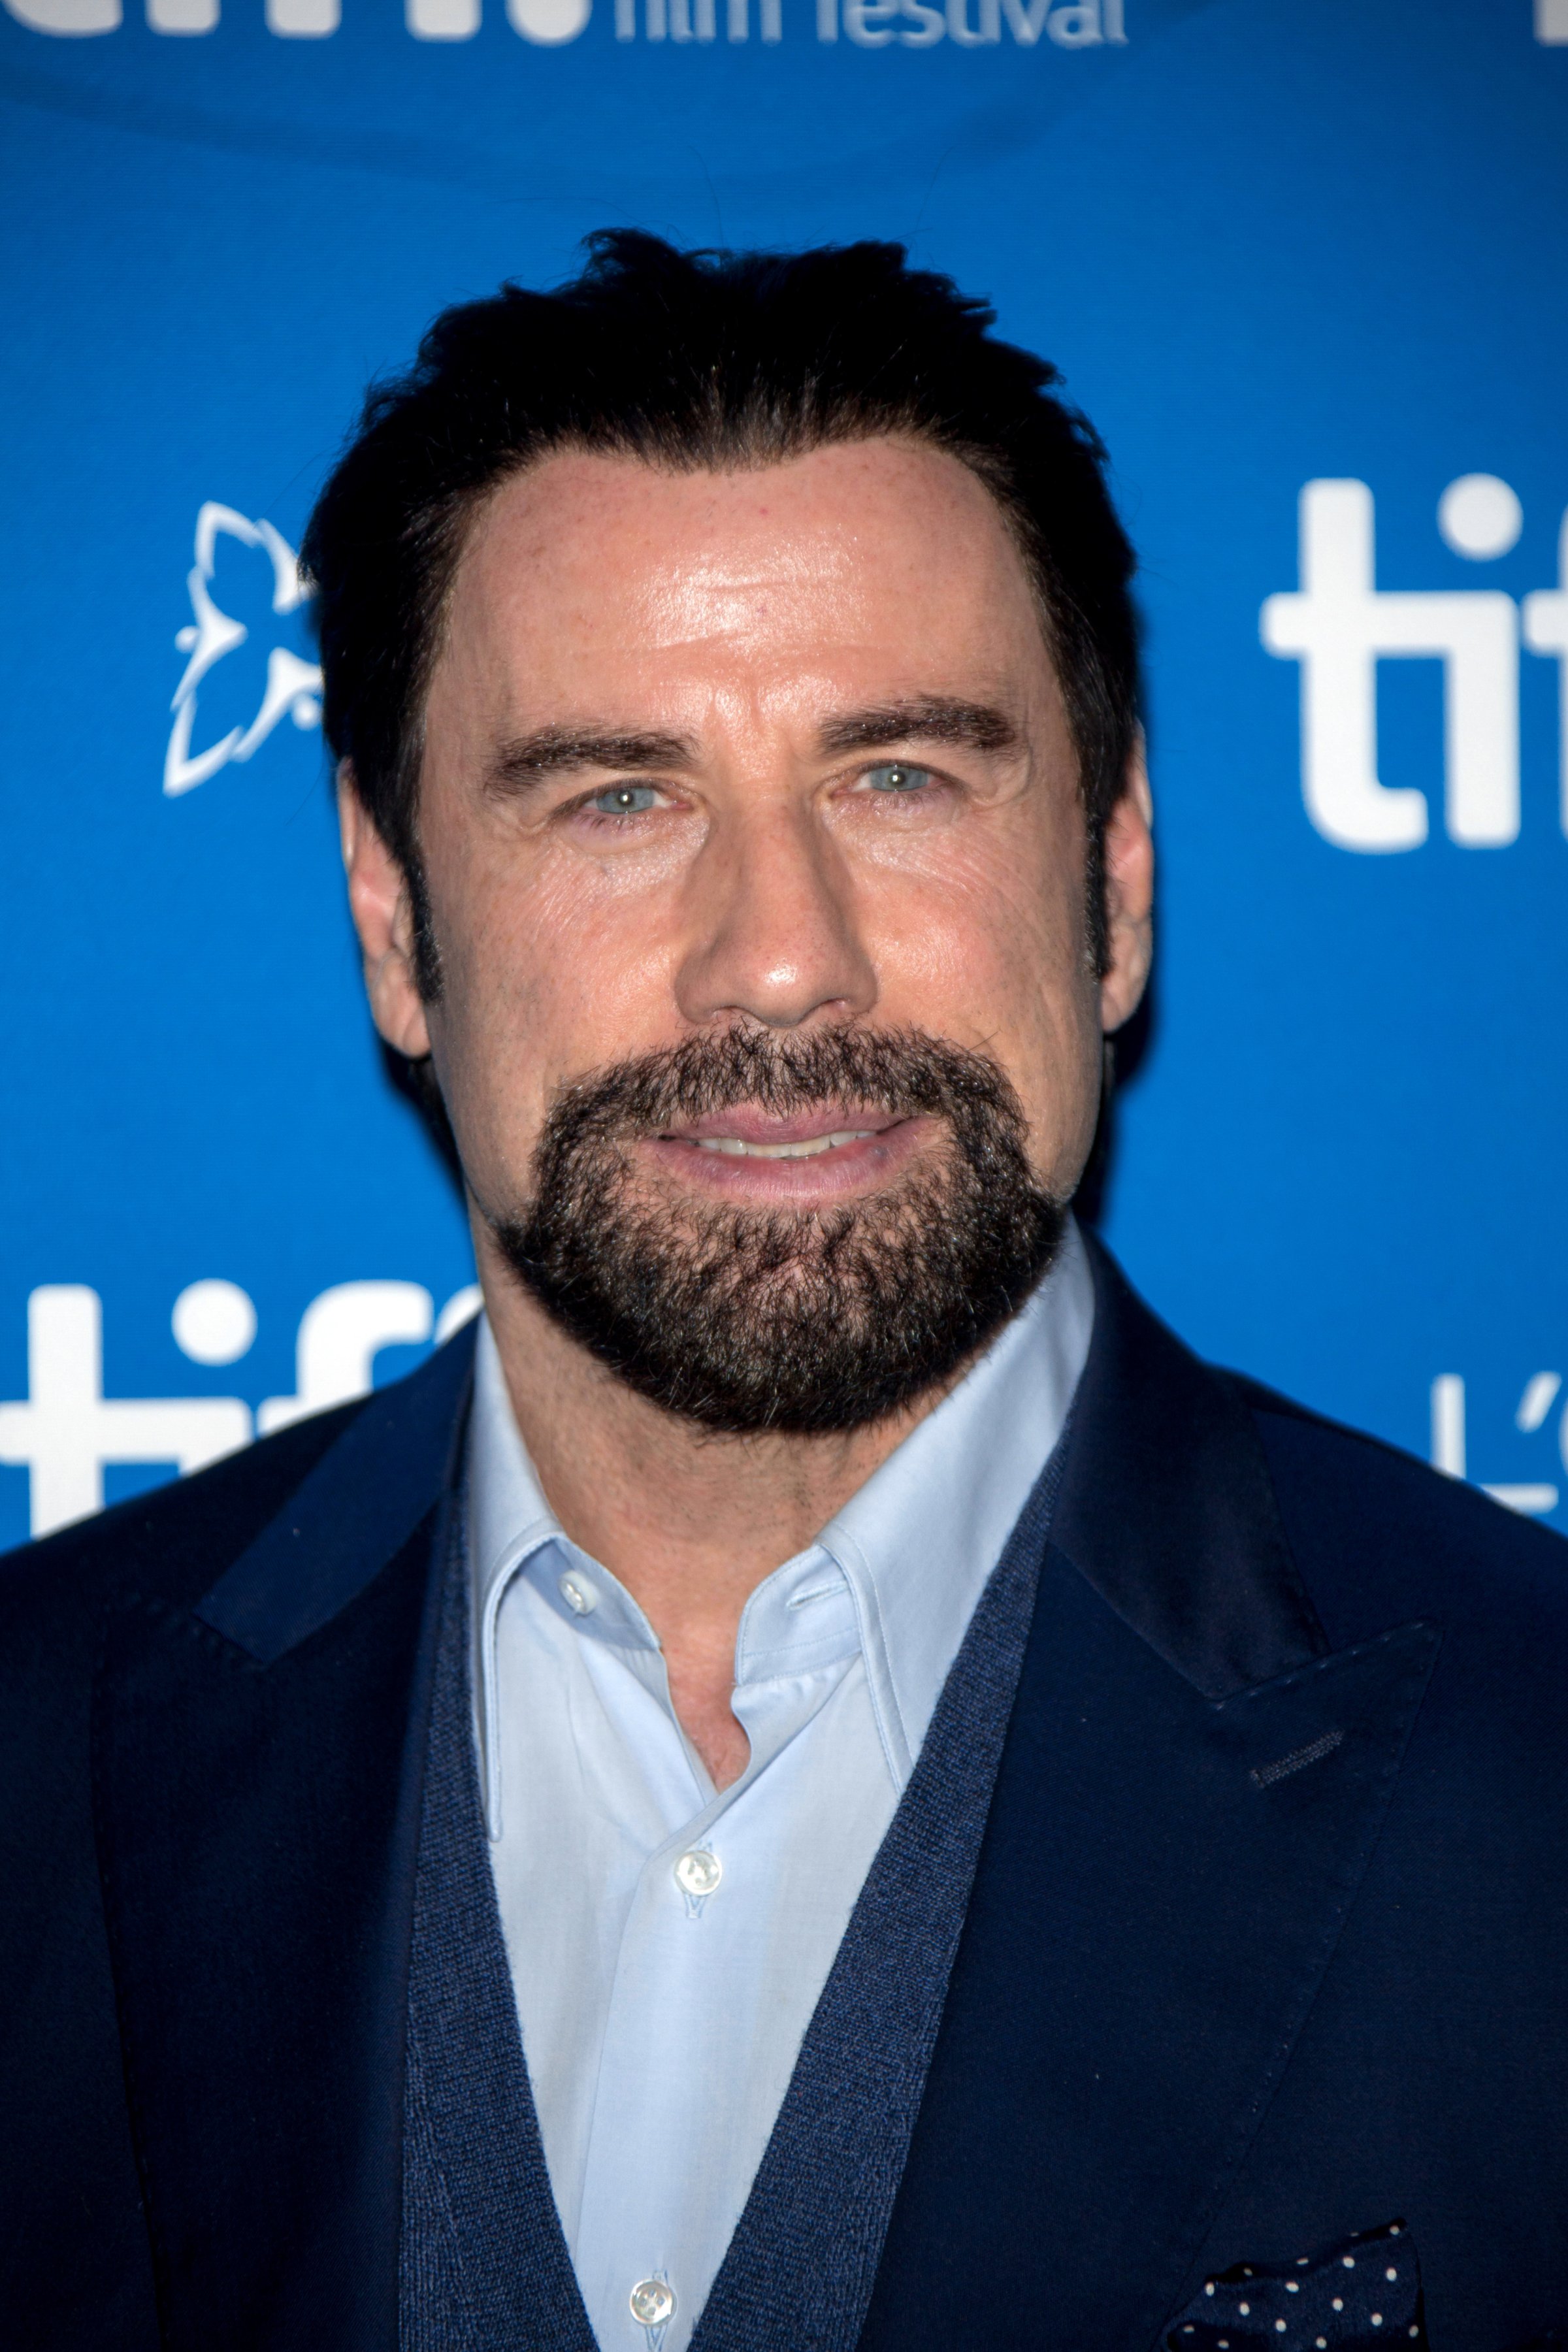 Actor John Travolta poses at the photocall of "The Forger" during the 39th Toronto International Film Festival (TIFF) in Toronto, Canada on Sept. 12, 2014.